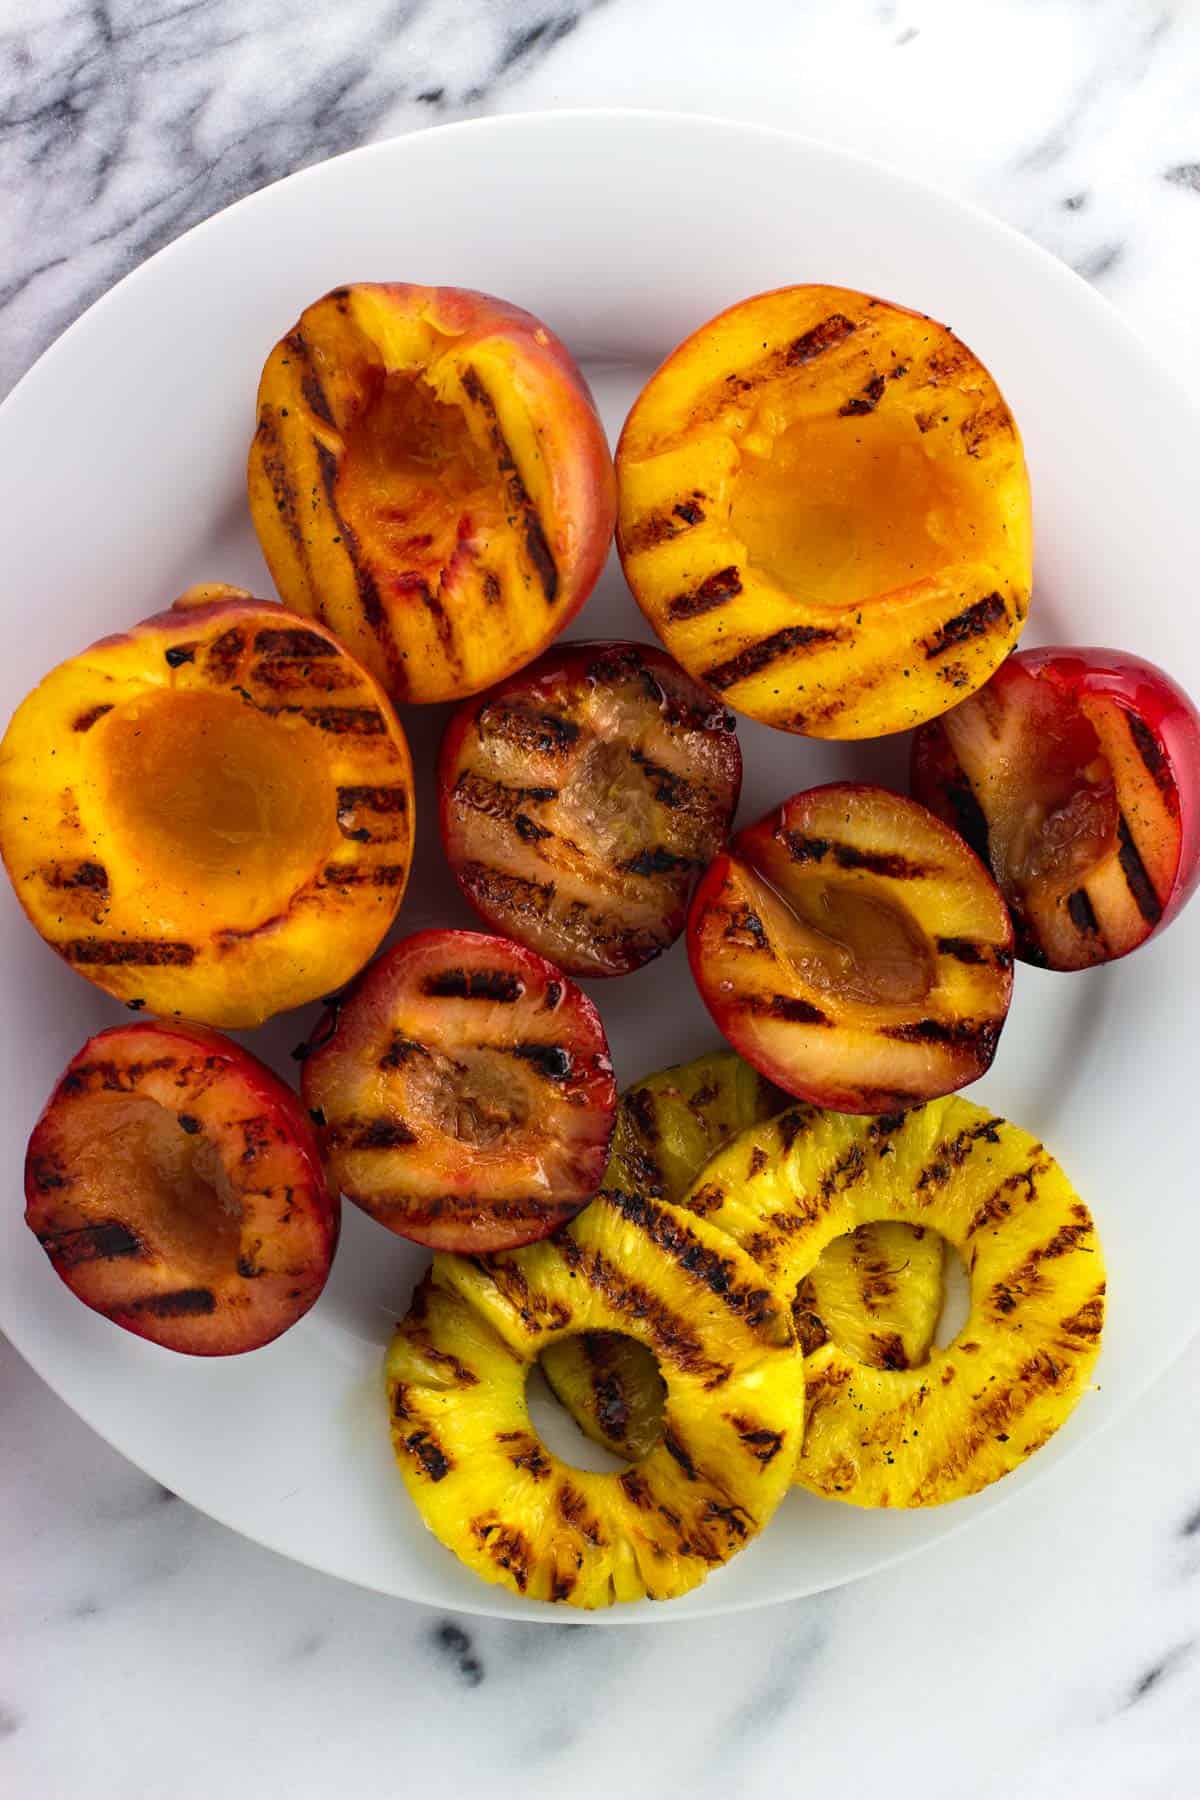 Grilled peach and plum halves on a plate.